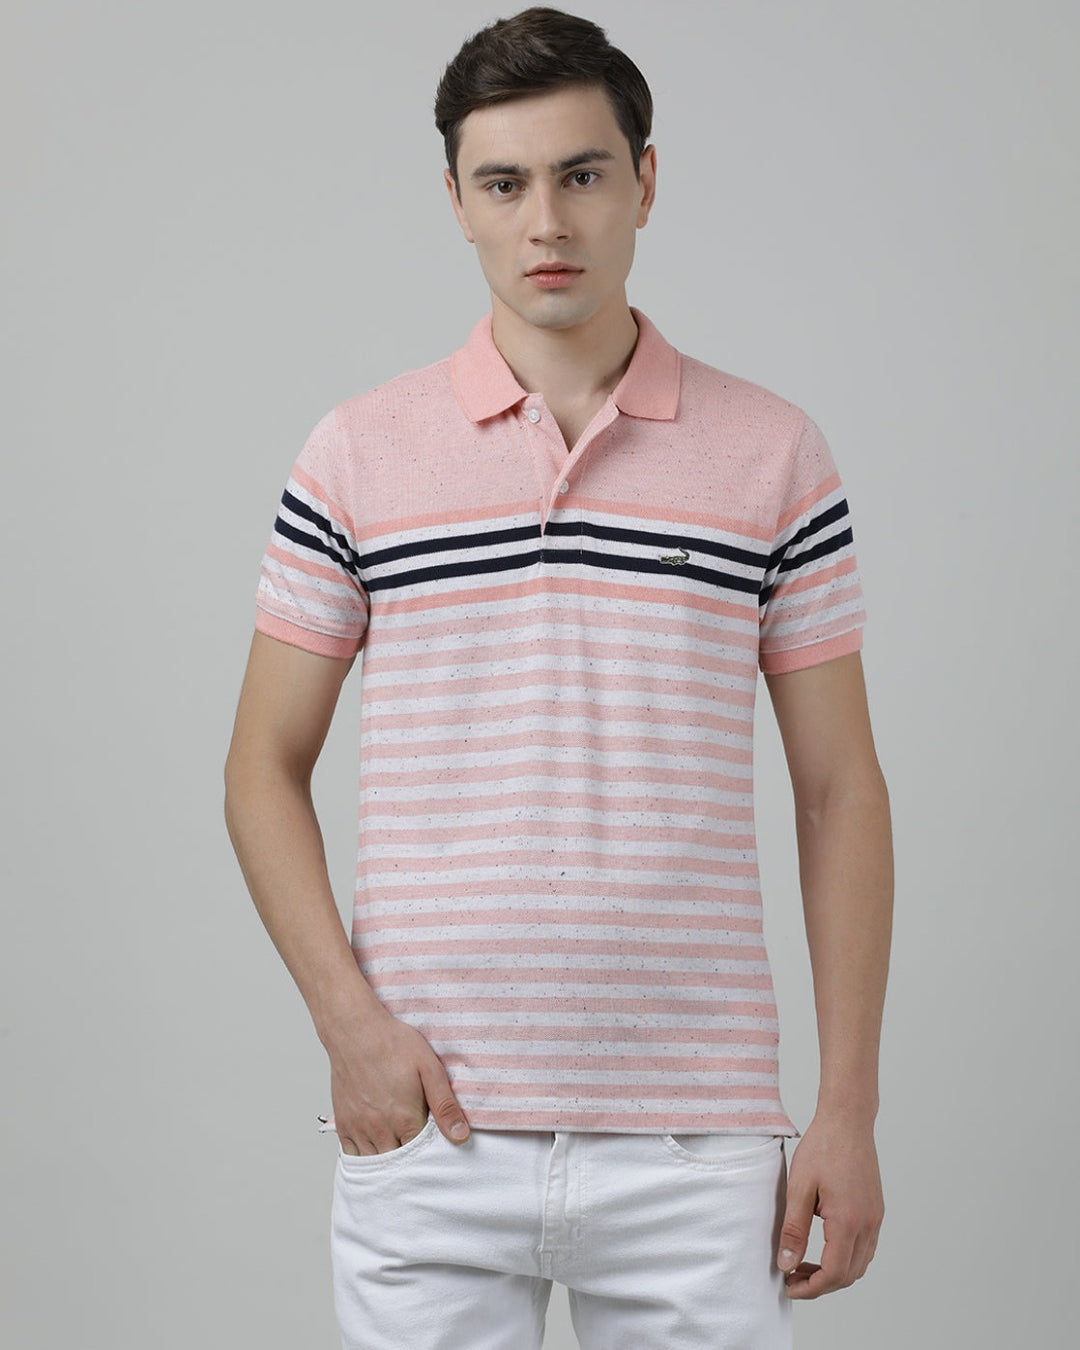 Casual Orange T-Shirt Engineering Stripes Half Sleeve Slim Fit with Collar for Men